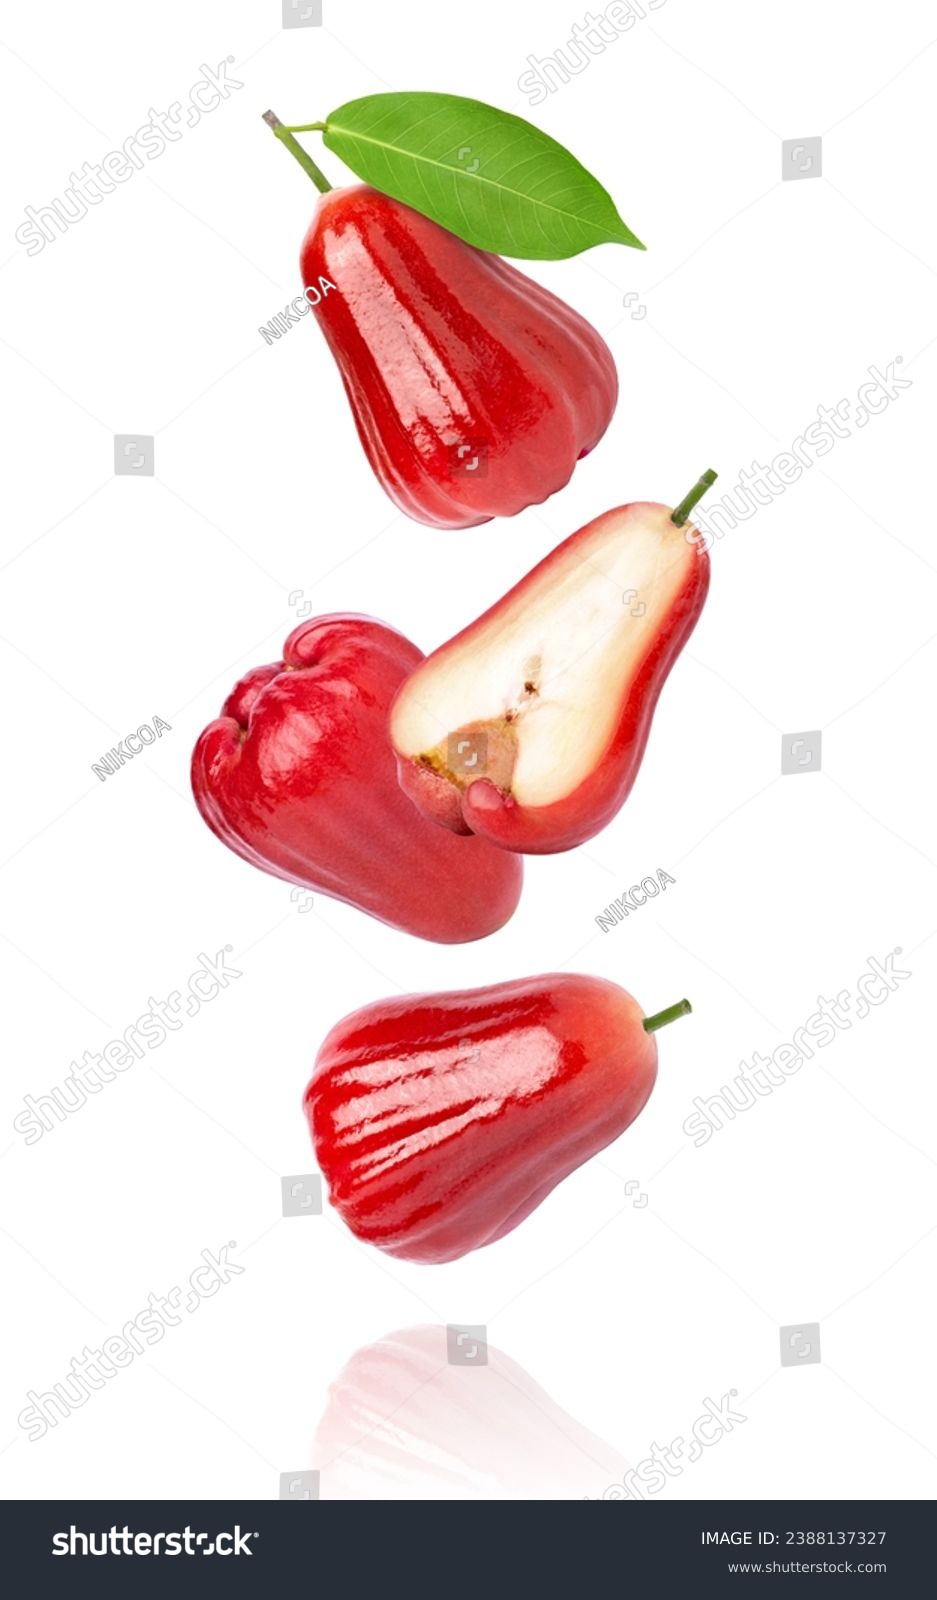 Red rose apple fruit with green leaf flying in the air isolated on white background. #2388137327